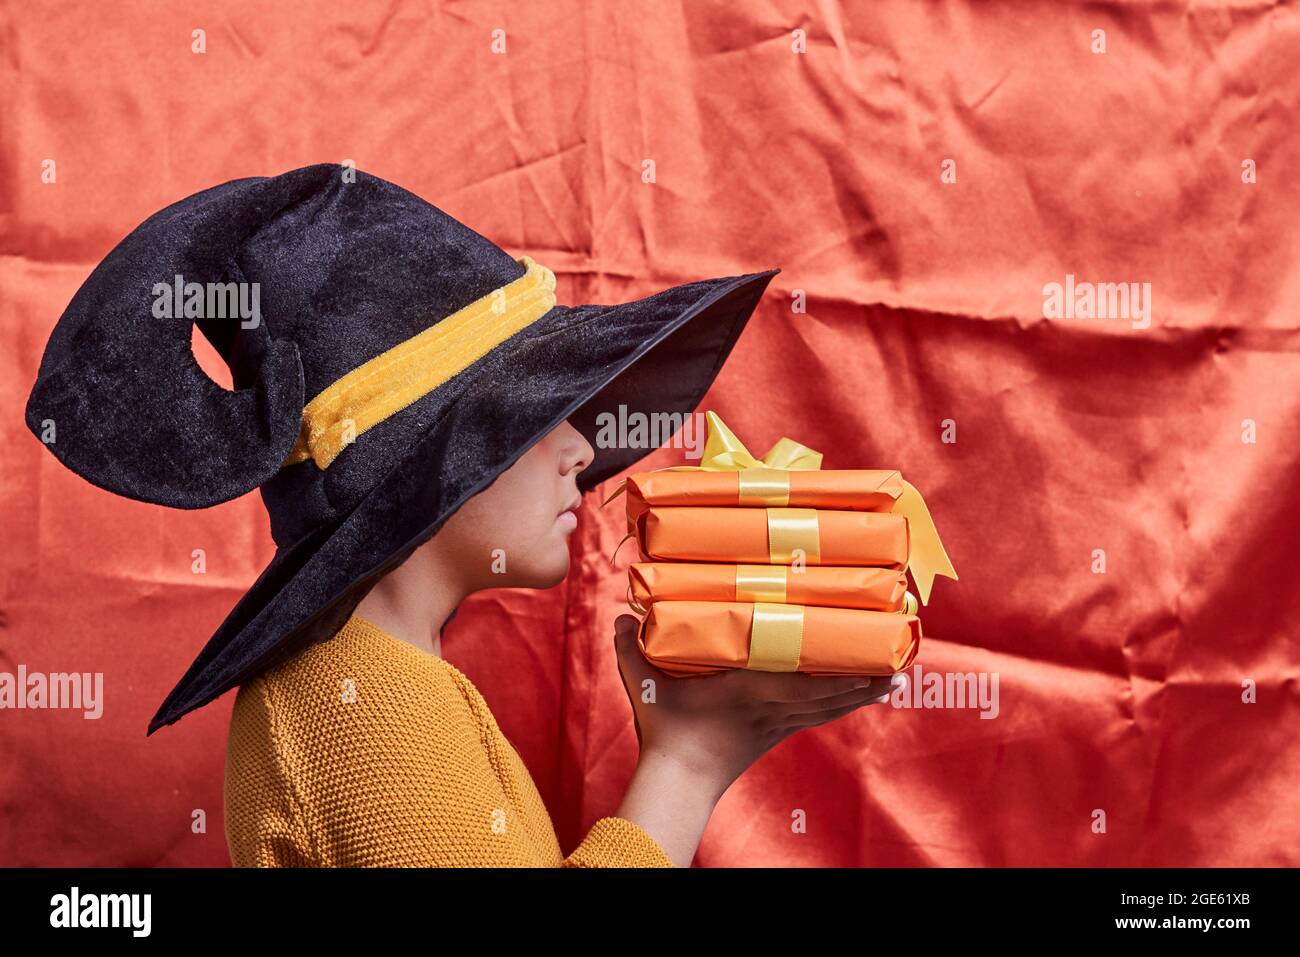 A little kid in witch cap holding a pile of gift boxes. Halloween gifts in hands of a boy over orange background Stock Photo